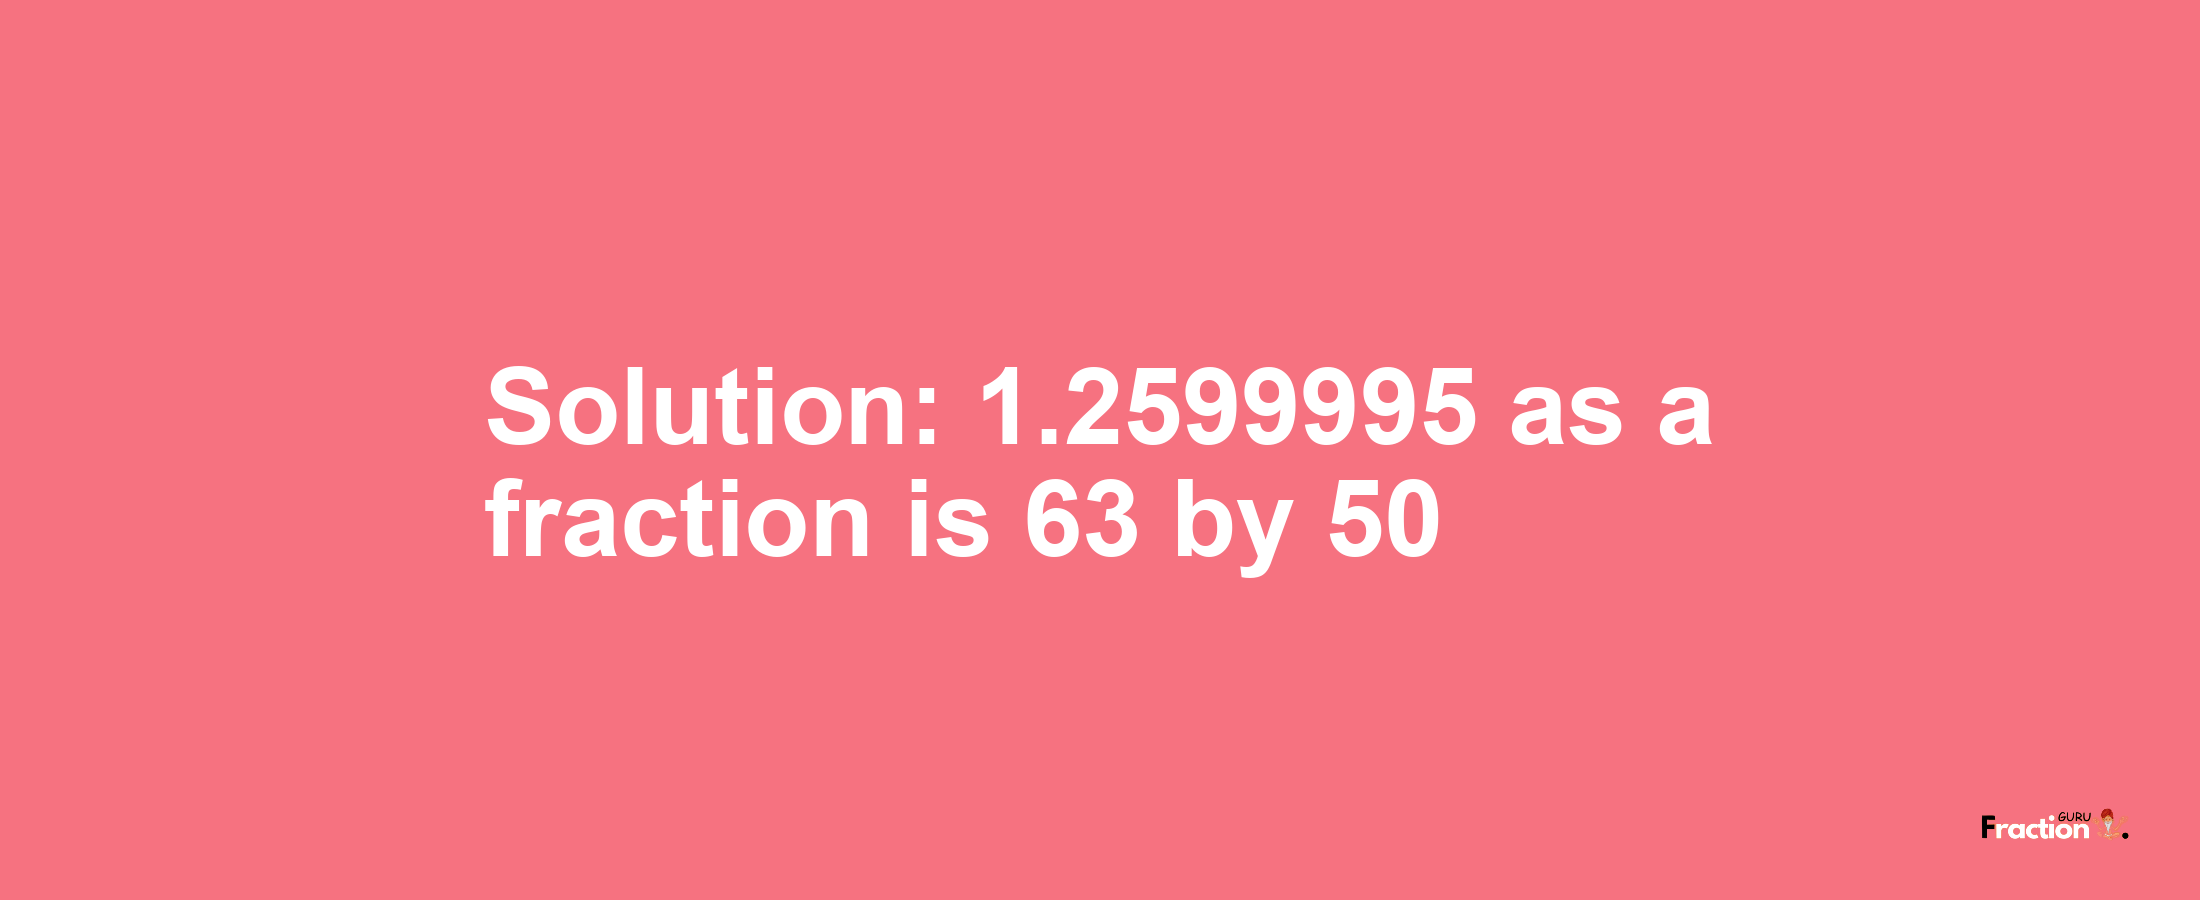 Solution:1.2599995 as a fraction is 63/50